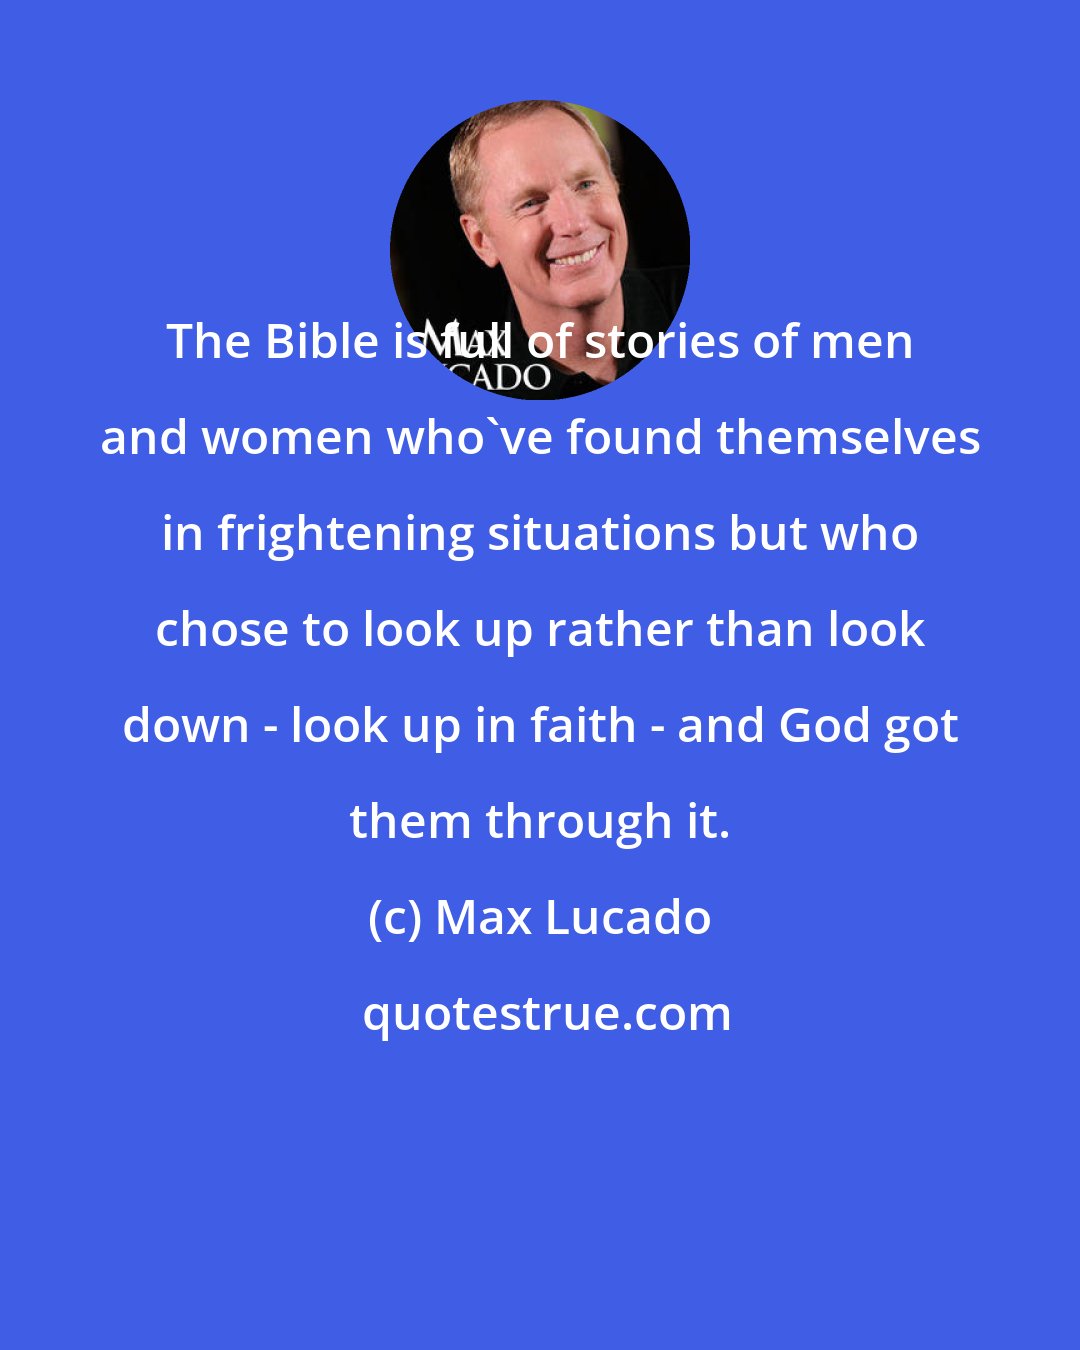 Max Lucado: The Bible is full of stories of men and women who've found themselves in frightening situations but who chose to look up rather than look down - look up in faith - and God got them through it.